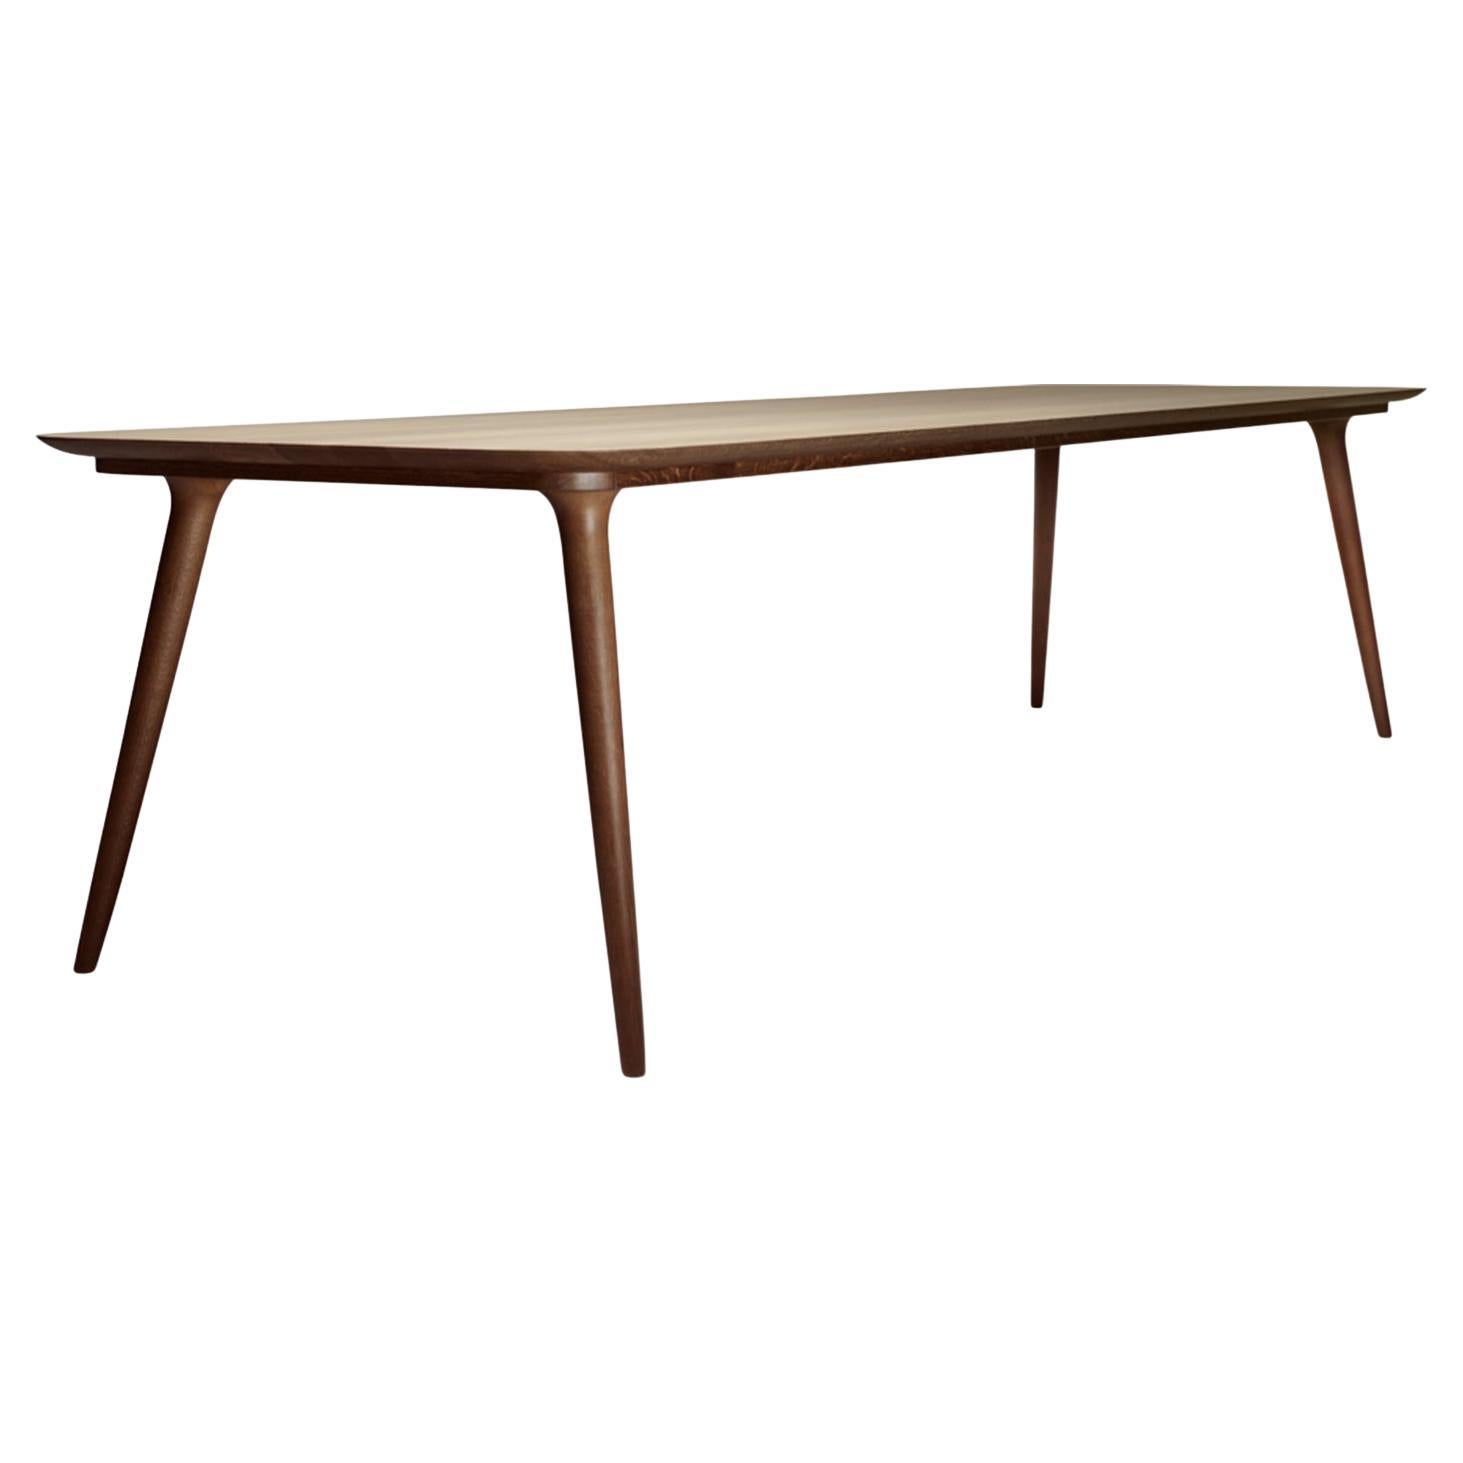 Moooi Zio Large Dining Table in Cinnamon Stained Oak by Marcel Wanders Studio For Sale